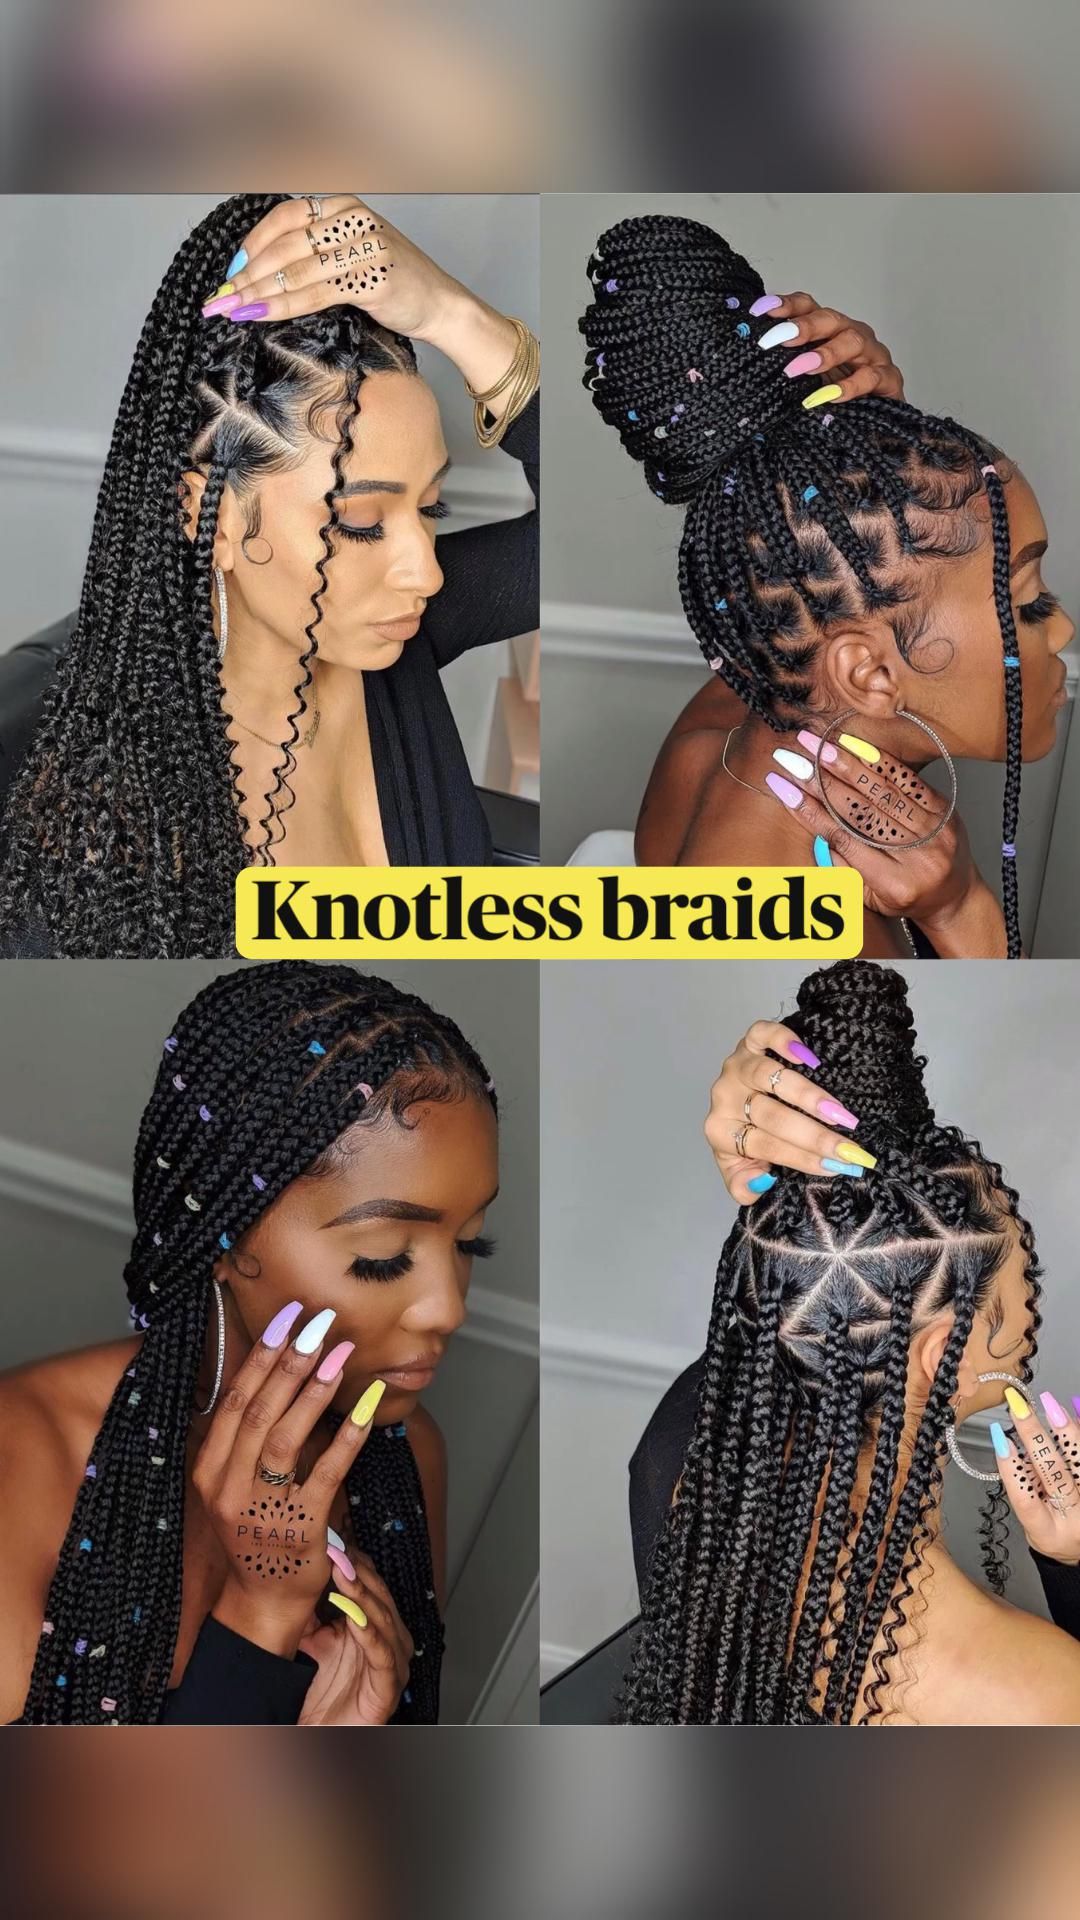 This contains an image of Knotless braids